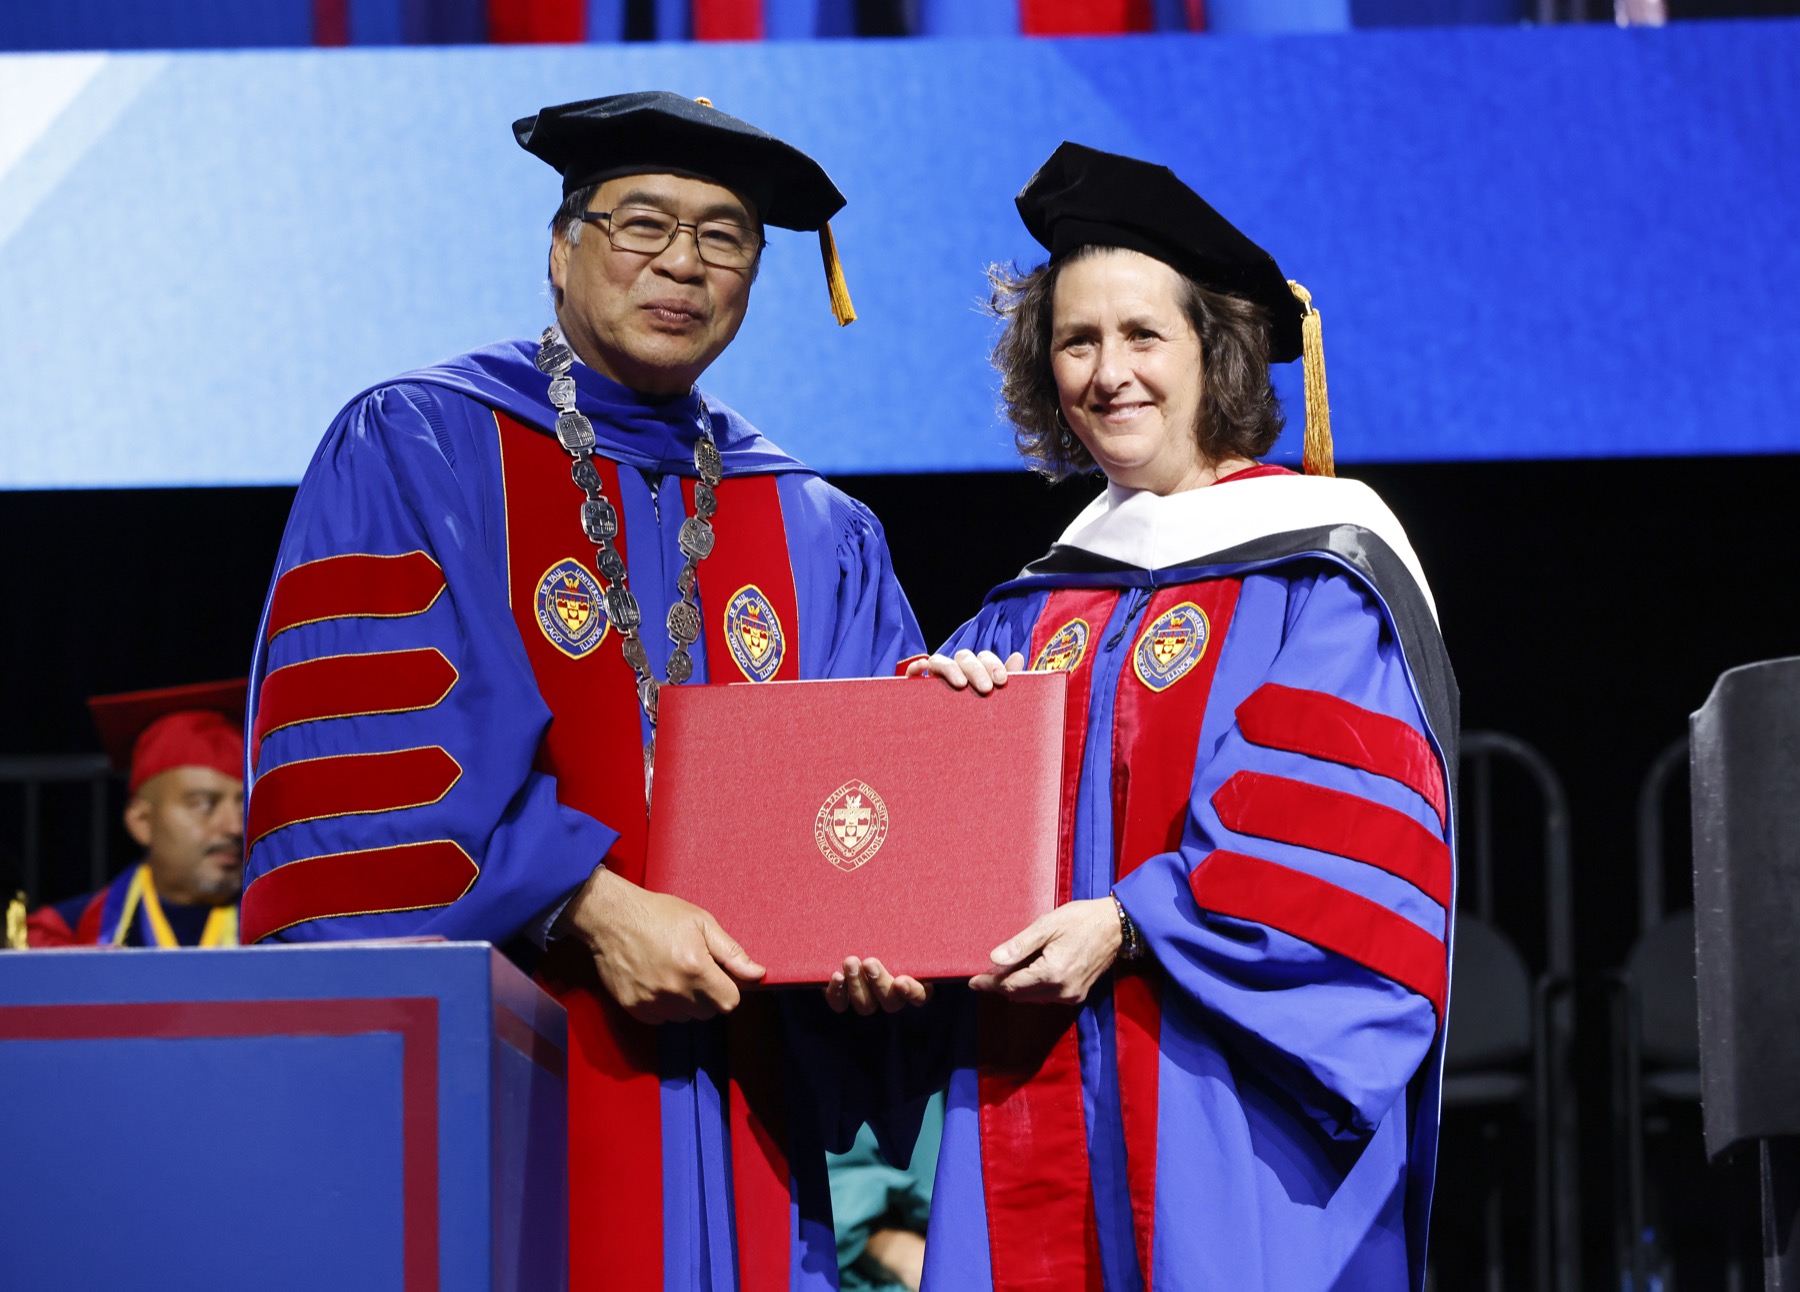 Gigi Pritzker Pucker accepted her honorary degree at the Liberal Arts and Social Sciences and the School of Continuing and Professional Studies ceremony.